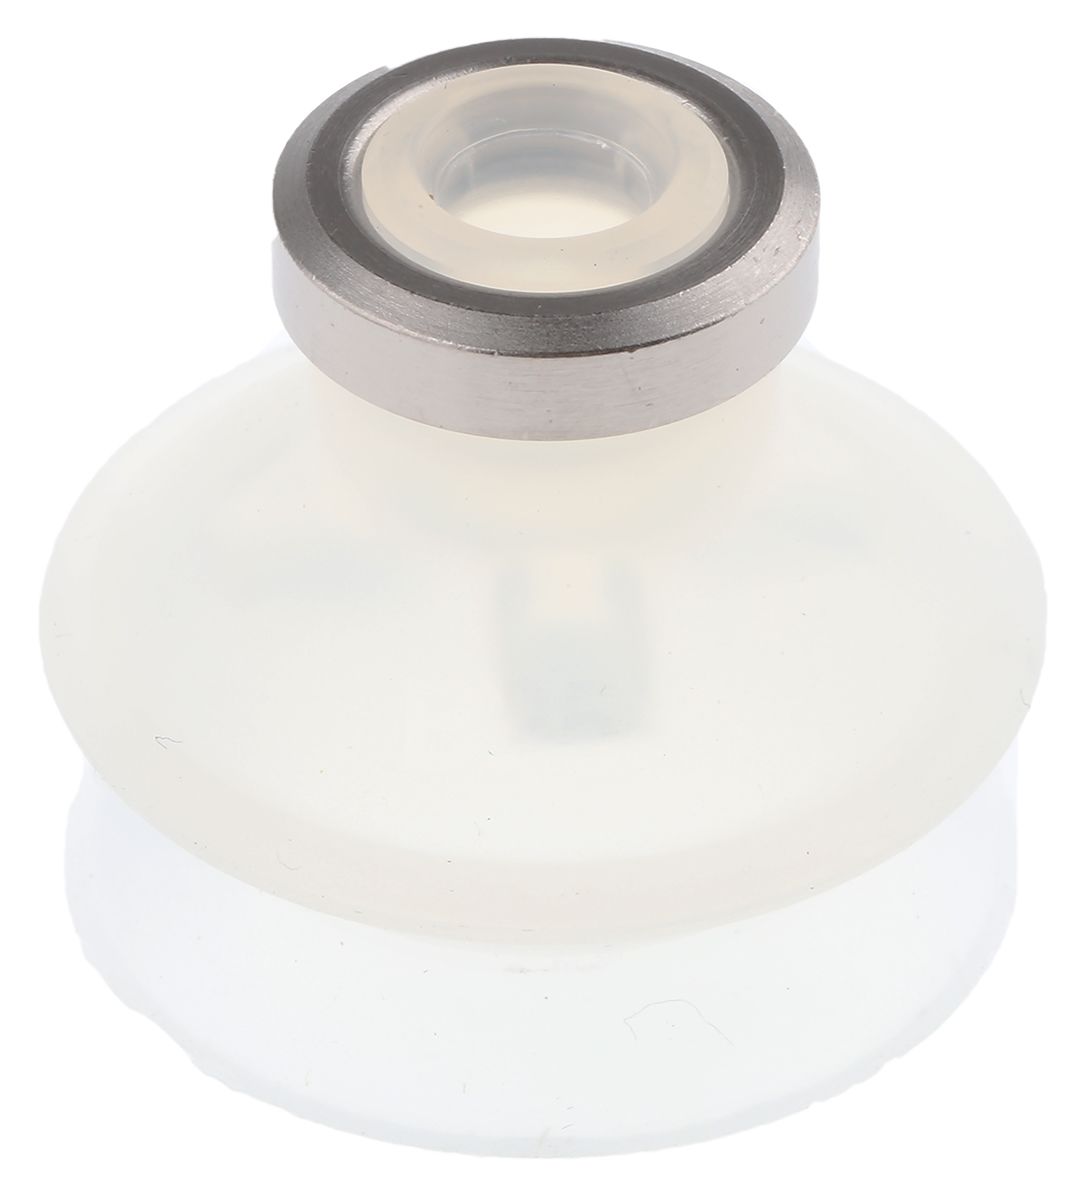 SMC 25mm Bellows Silicon Rubber Suction Cup ZP25BS